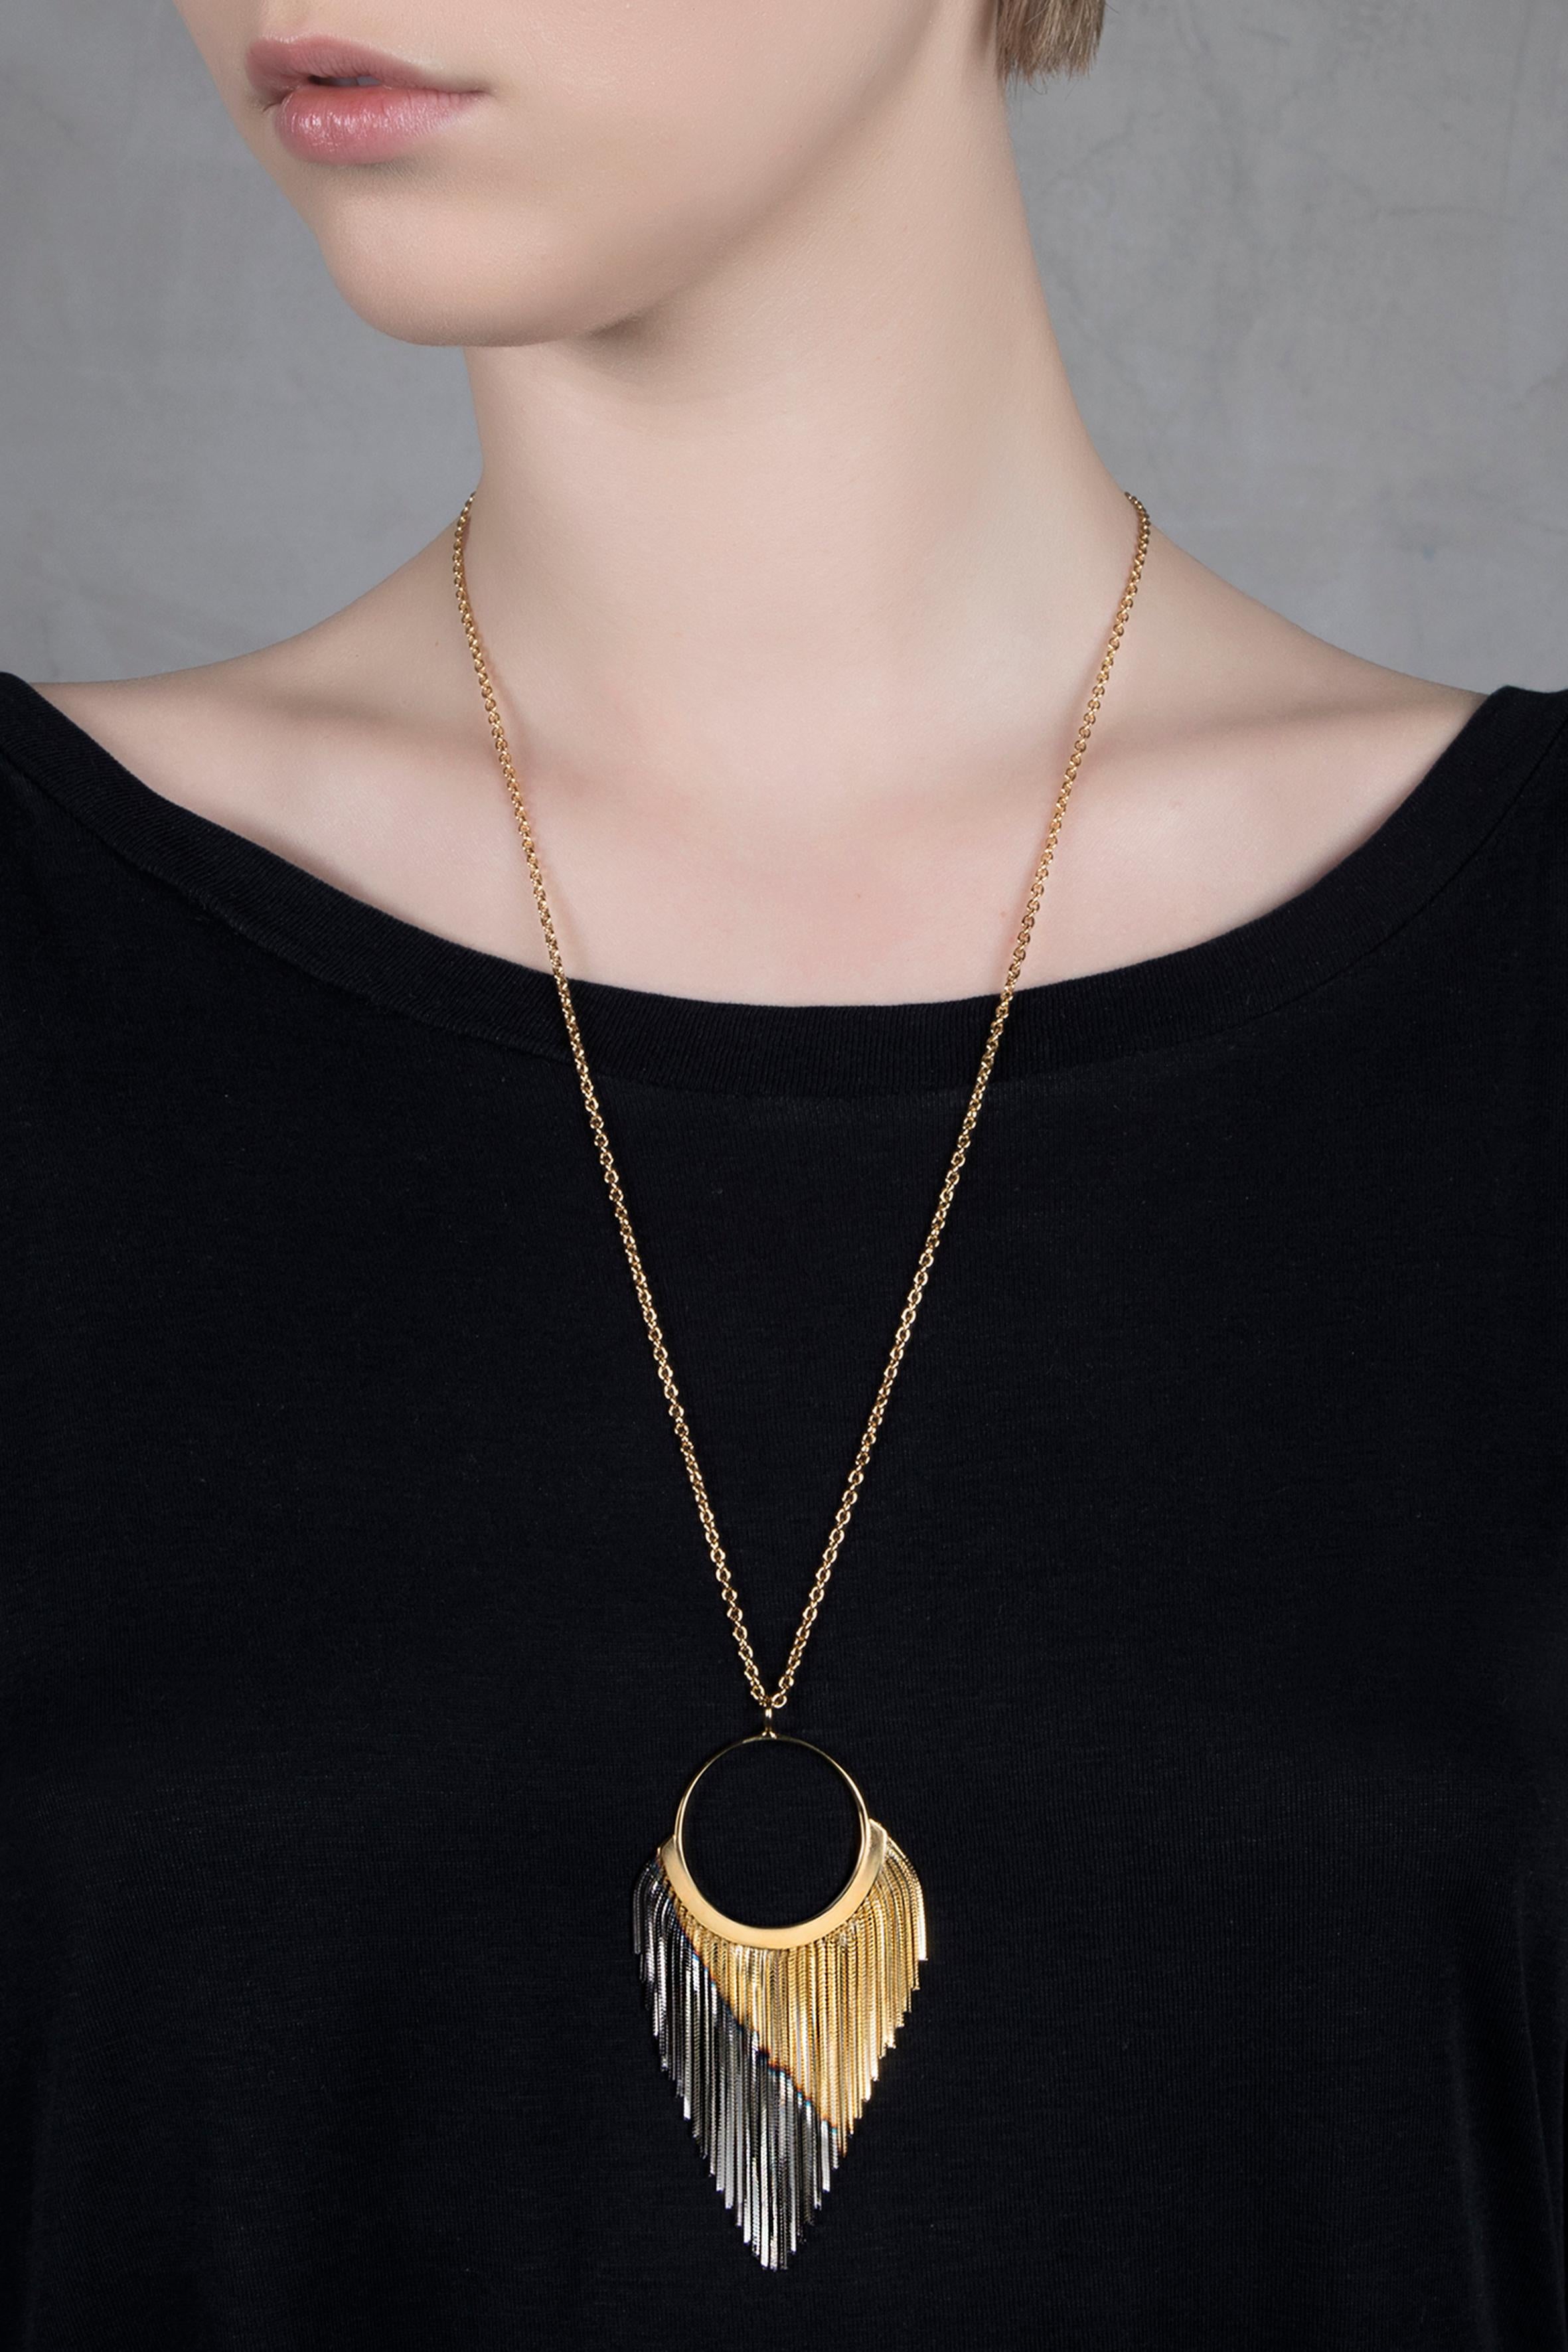 Referencing Iosselliani’s signature craftsmanship, this necklace features a two tones finishing hoop pendant, combining the 18 carat gold plating with a darker shade of gunmetal. Designed in Italy since 1997 the piece shows the iconic two tones